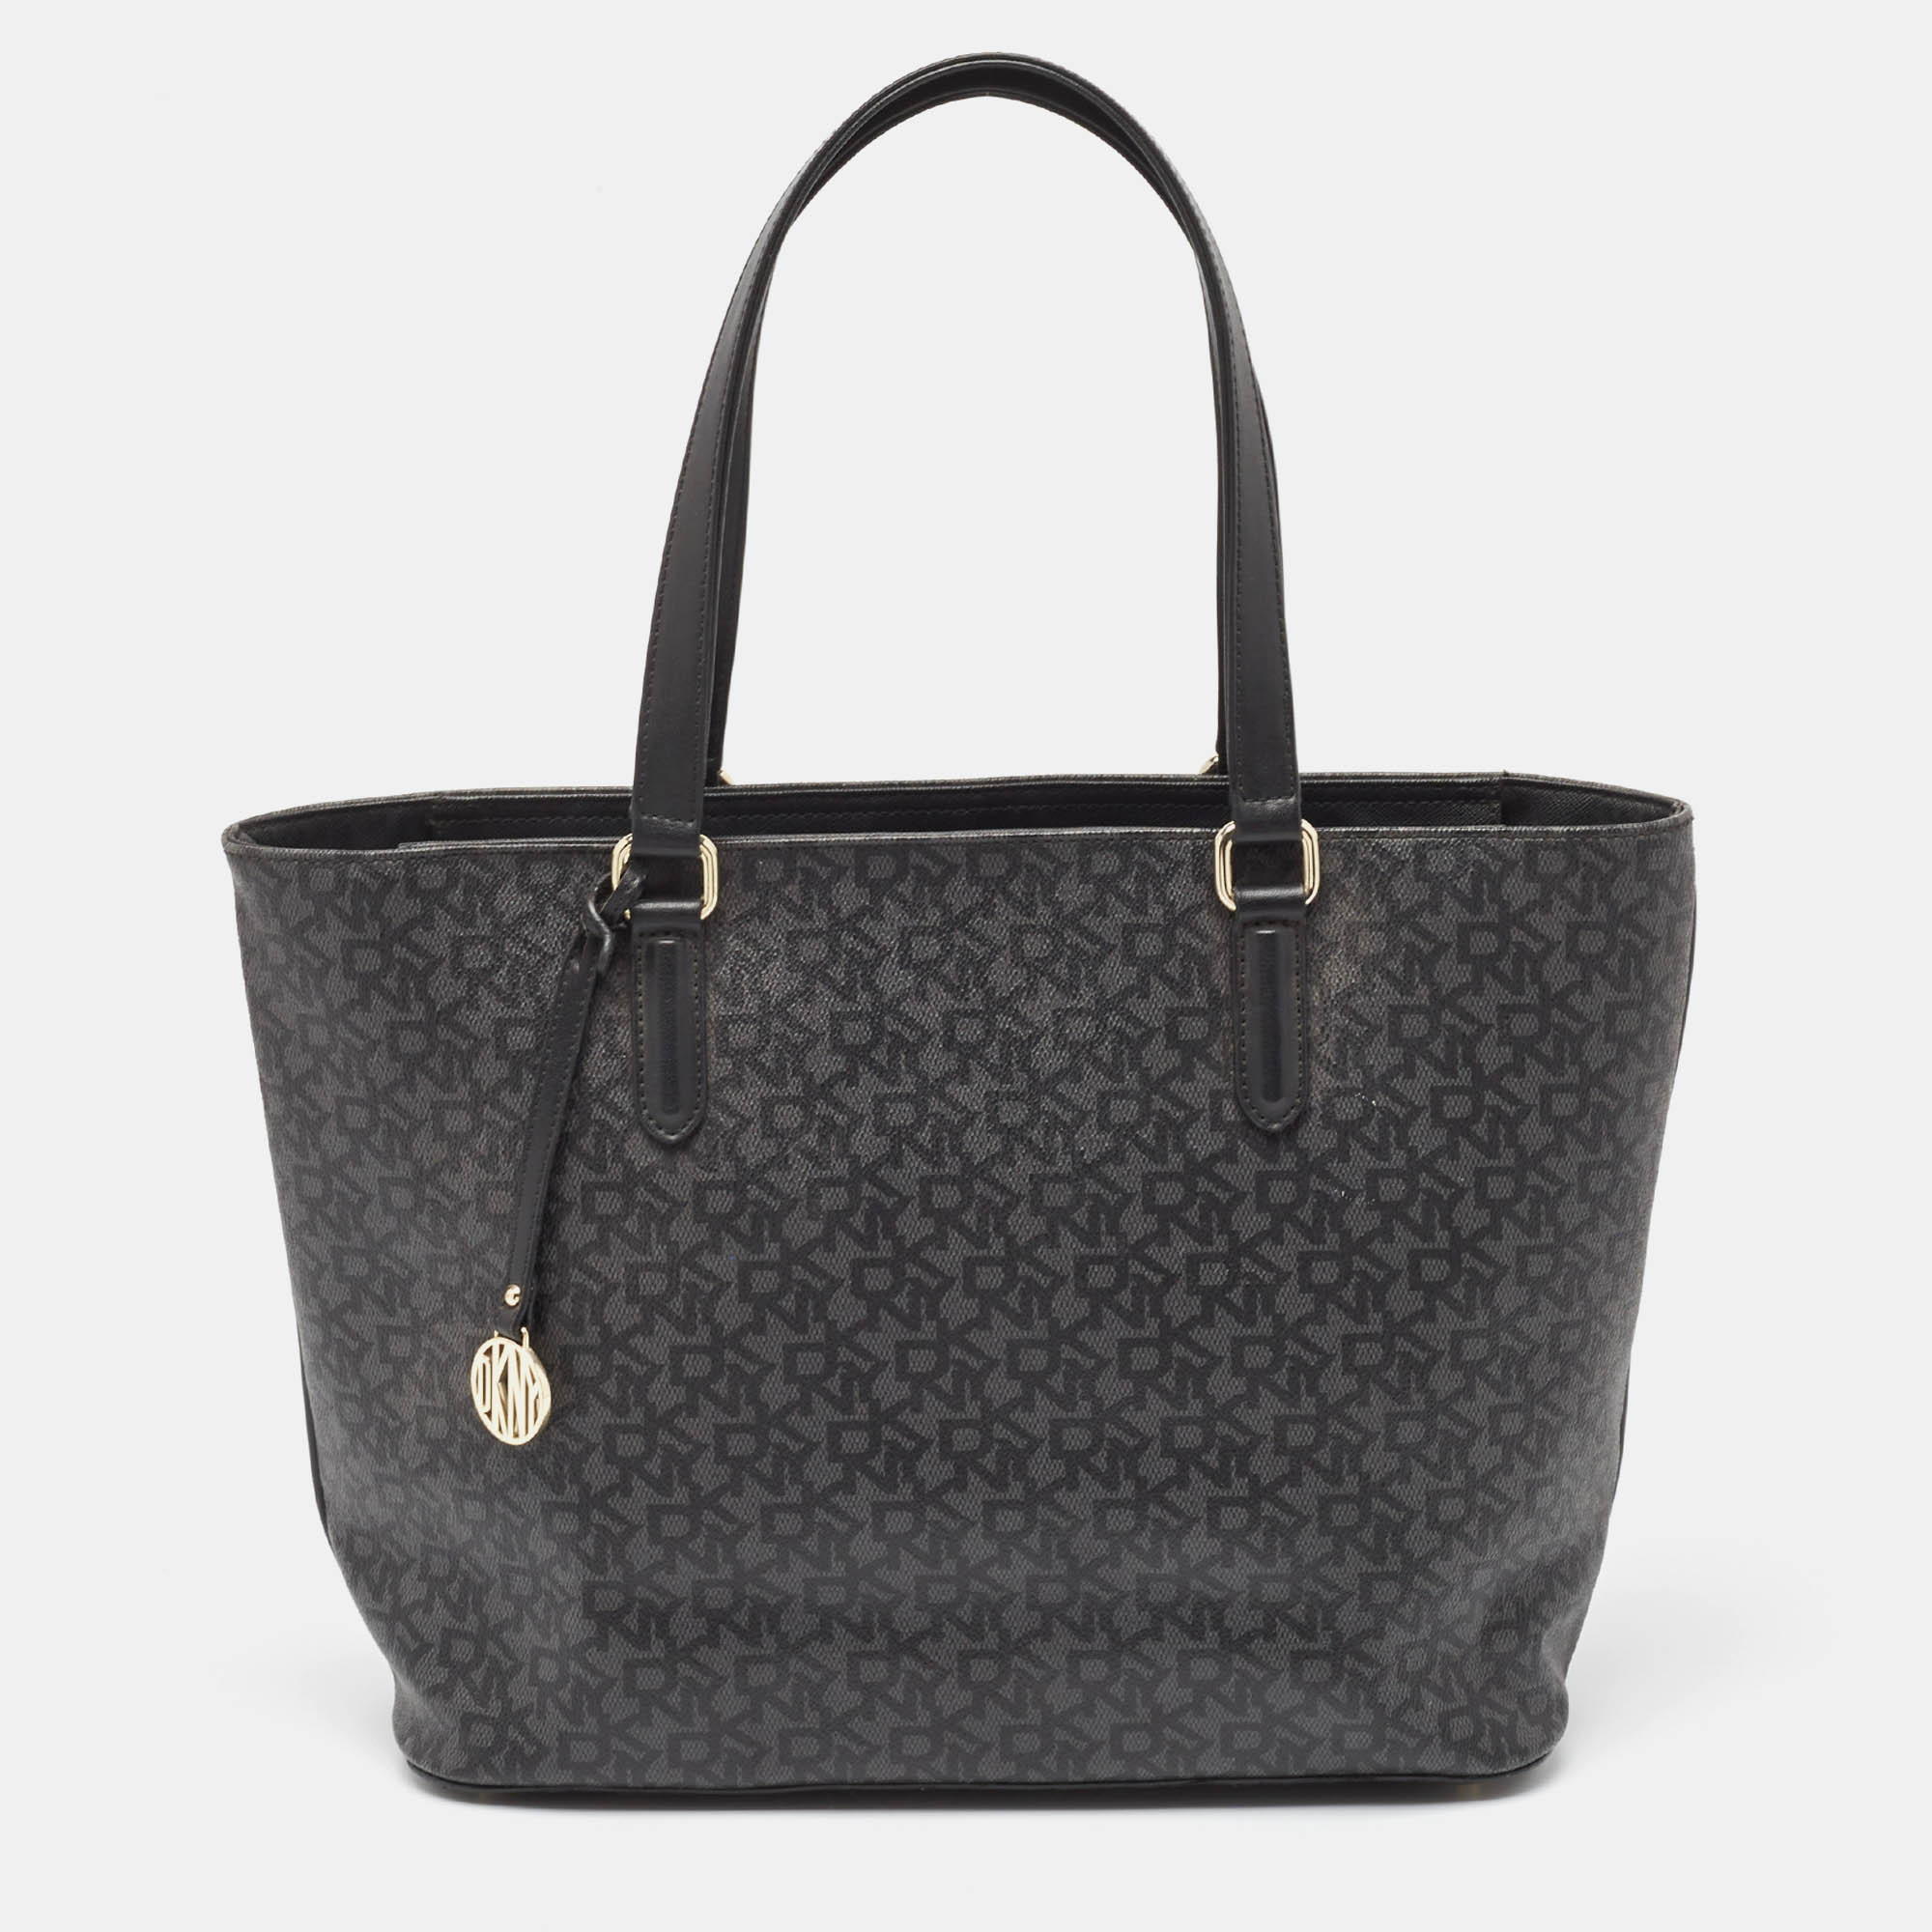 

Dkny Black Monogram Coated Canvas and Leather Top Zip Tote